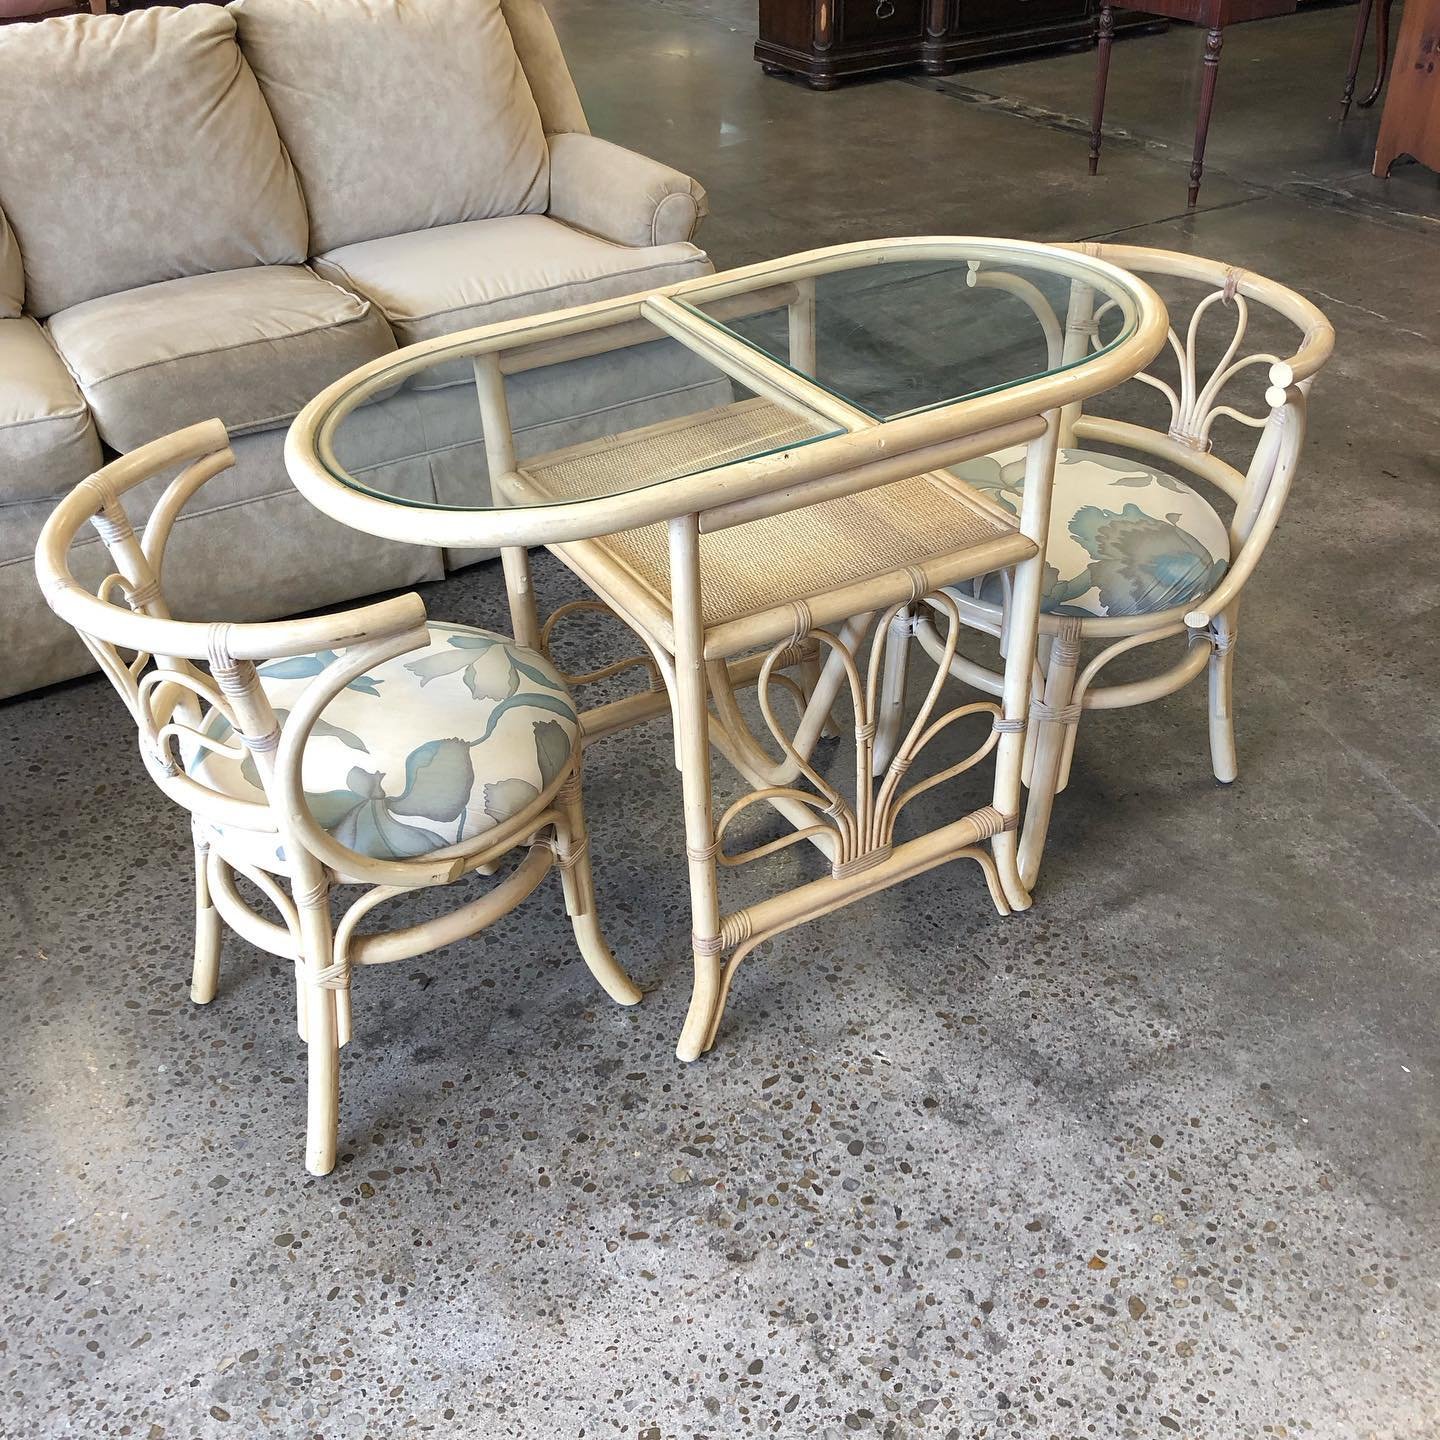 We can deliver your furniture purchase for $55. Come see us! We&rsquo;re open 10am-6pm at 1407 Sherwood Ave. RVA 23220 (804) 353-8890. DiversityThrift.org
#furniture #thriftfurniture #usedfurniture